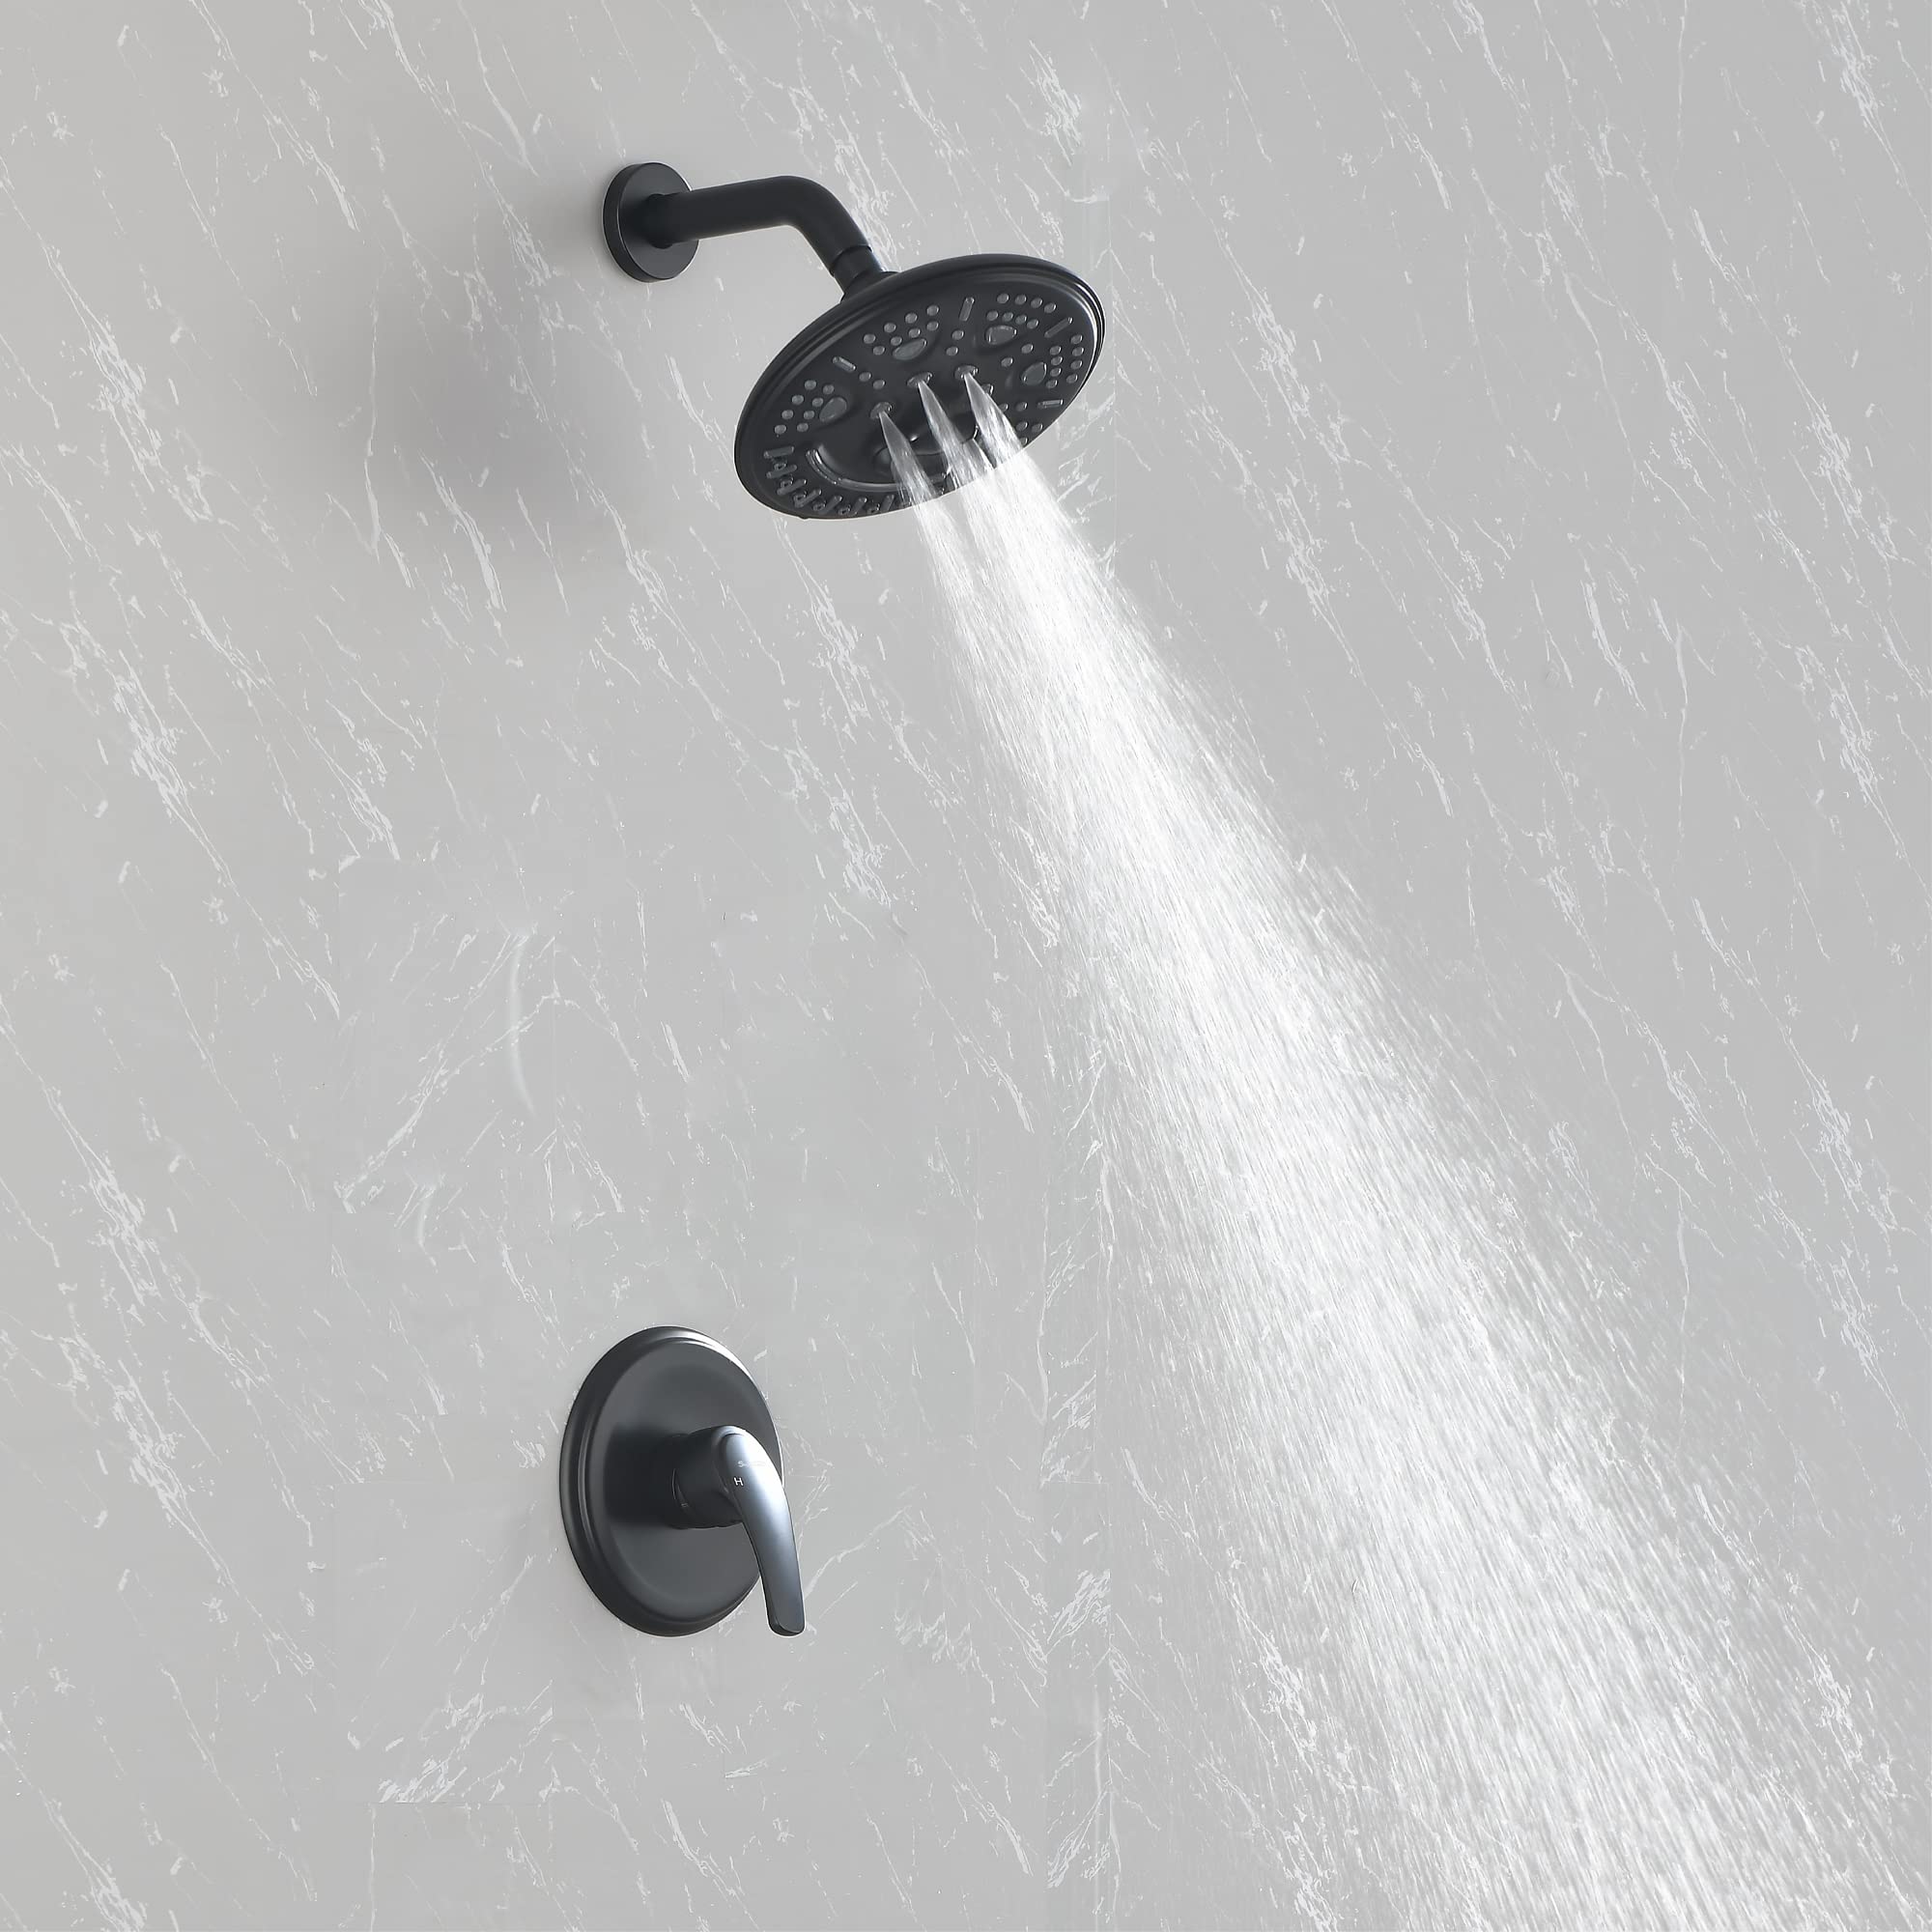 SHAMANDA Luxury Shower System with Valve, Shower Faucet Sets Complete with 6-Spray Shower Head and Handle, Single Function Shower Trim Kit Matte Black, L808-7